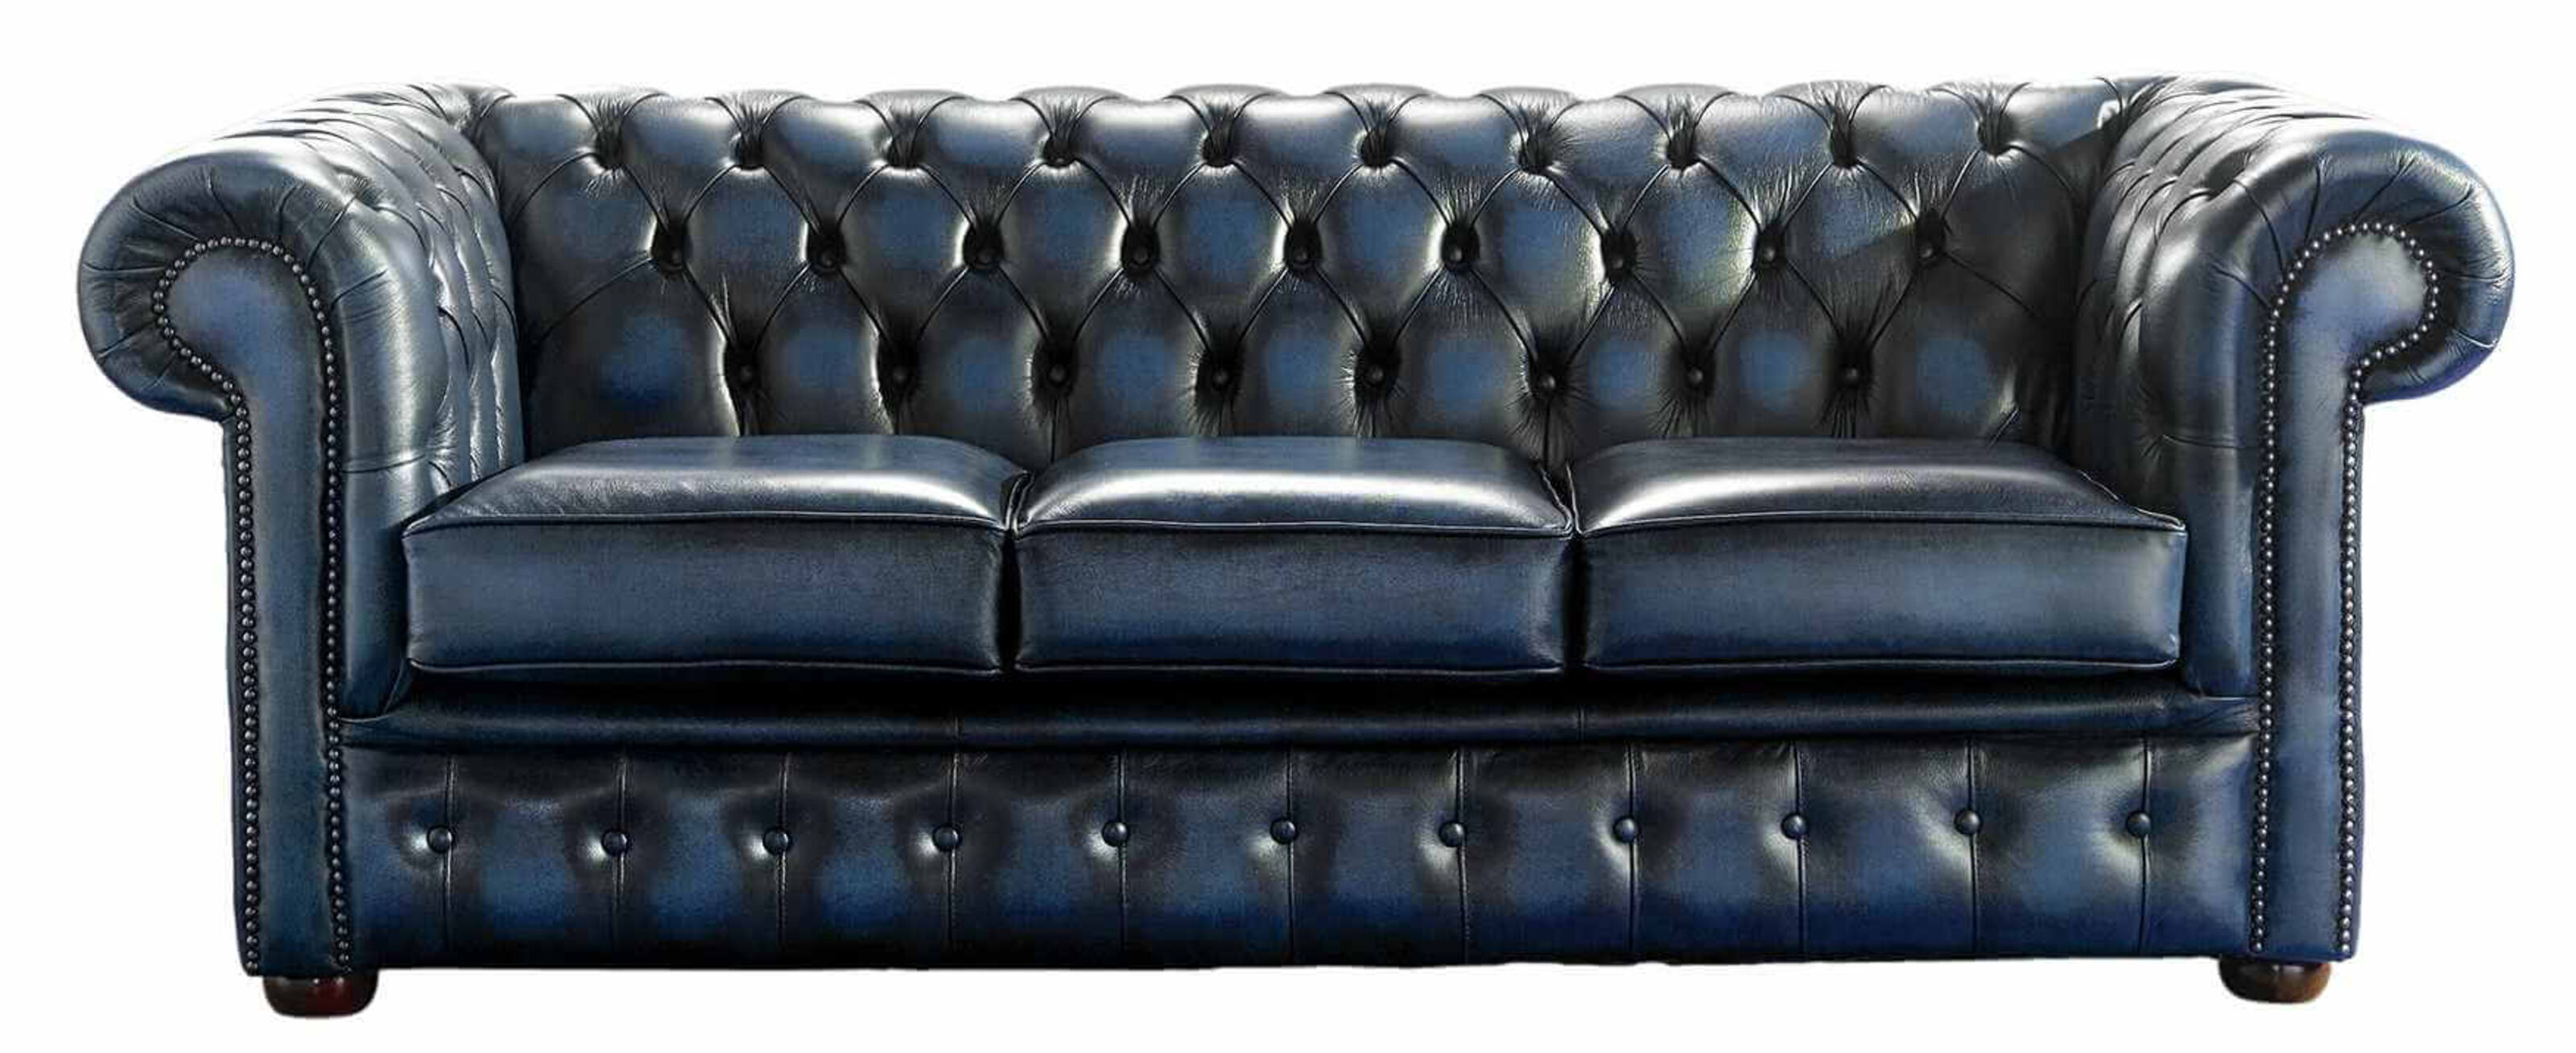 Chesterfield Sofas Unveiled Discovering the Artisan Behind the Elegance  %Post Title